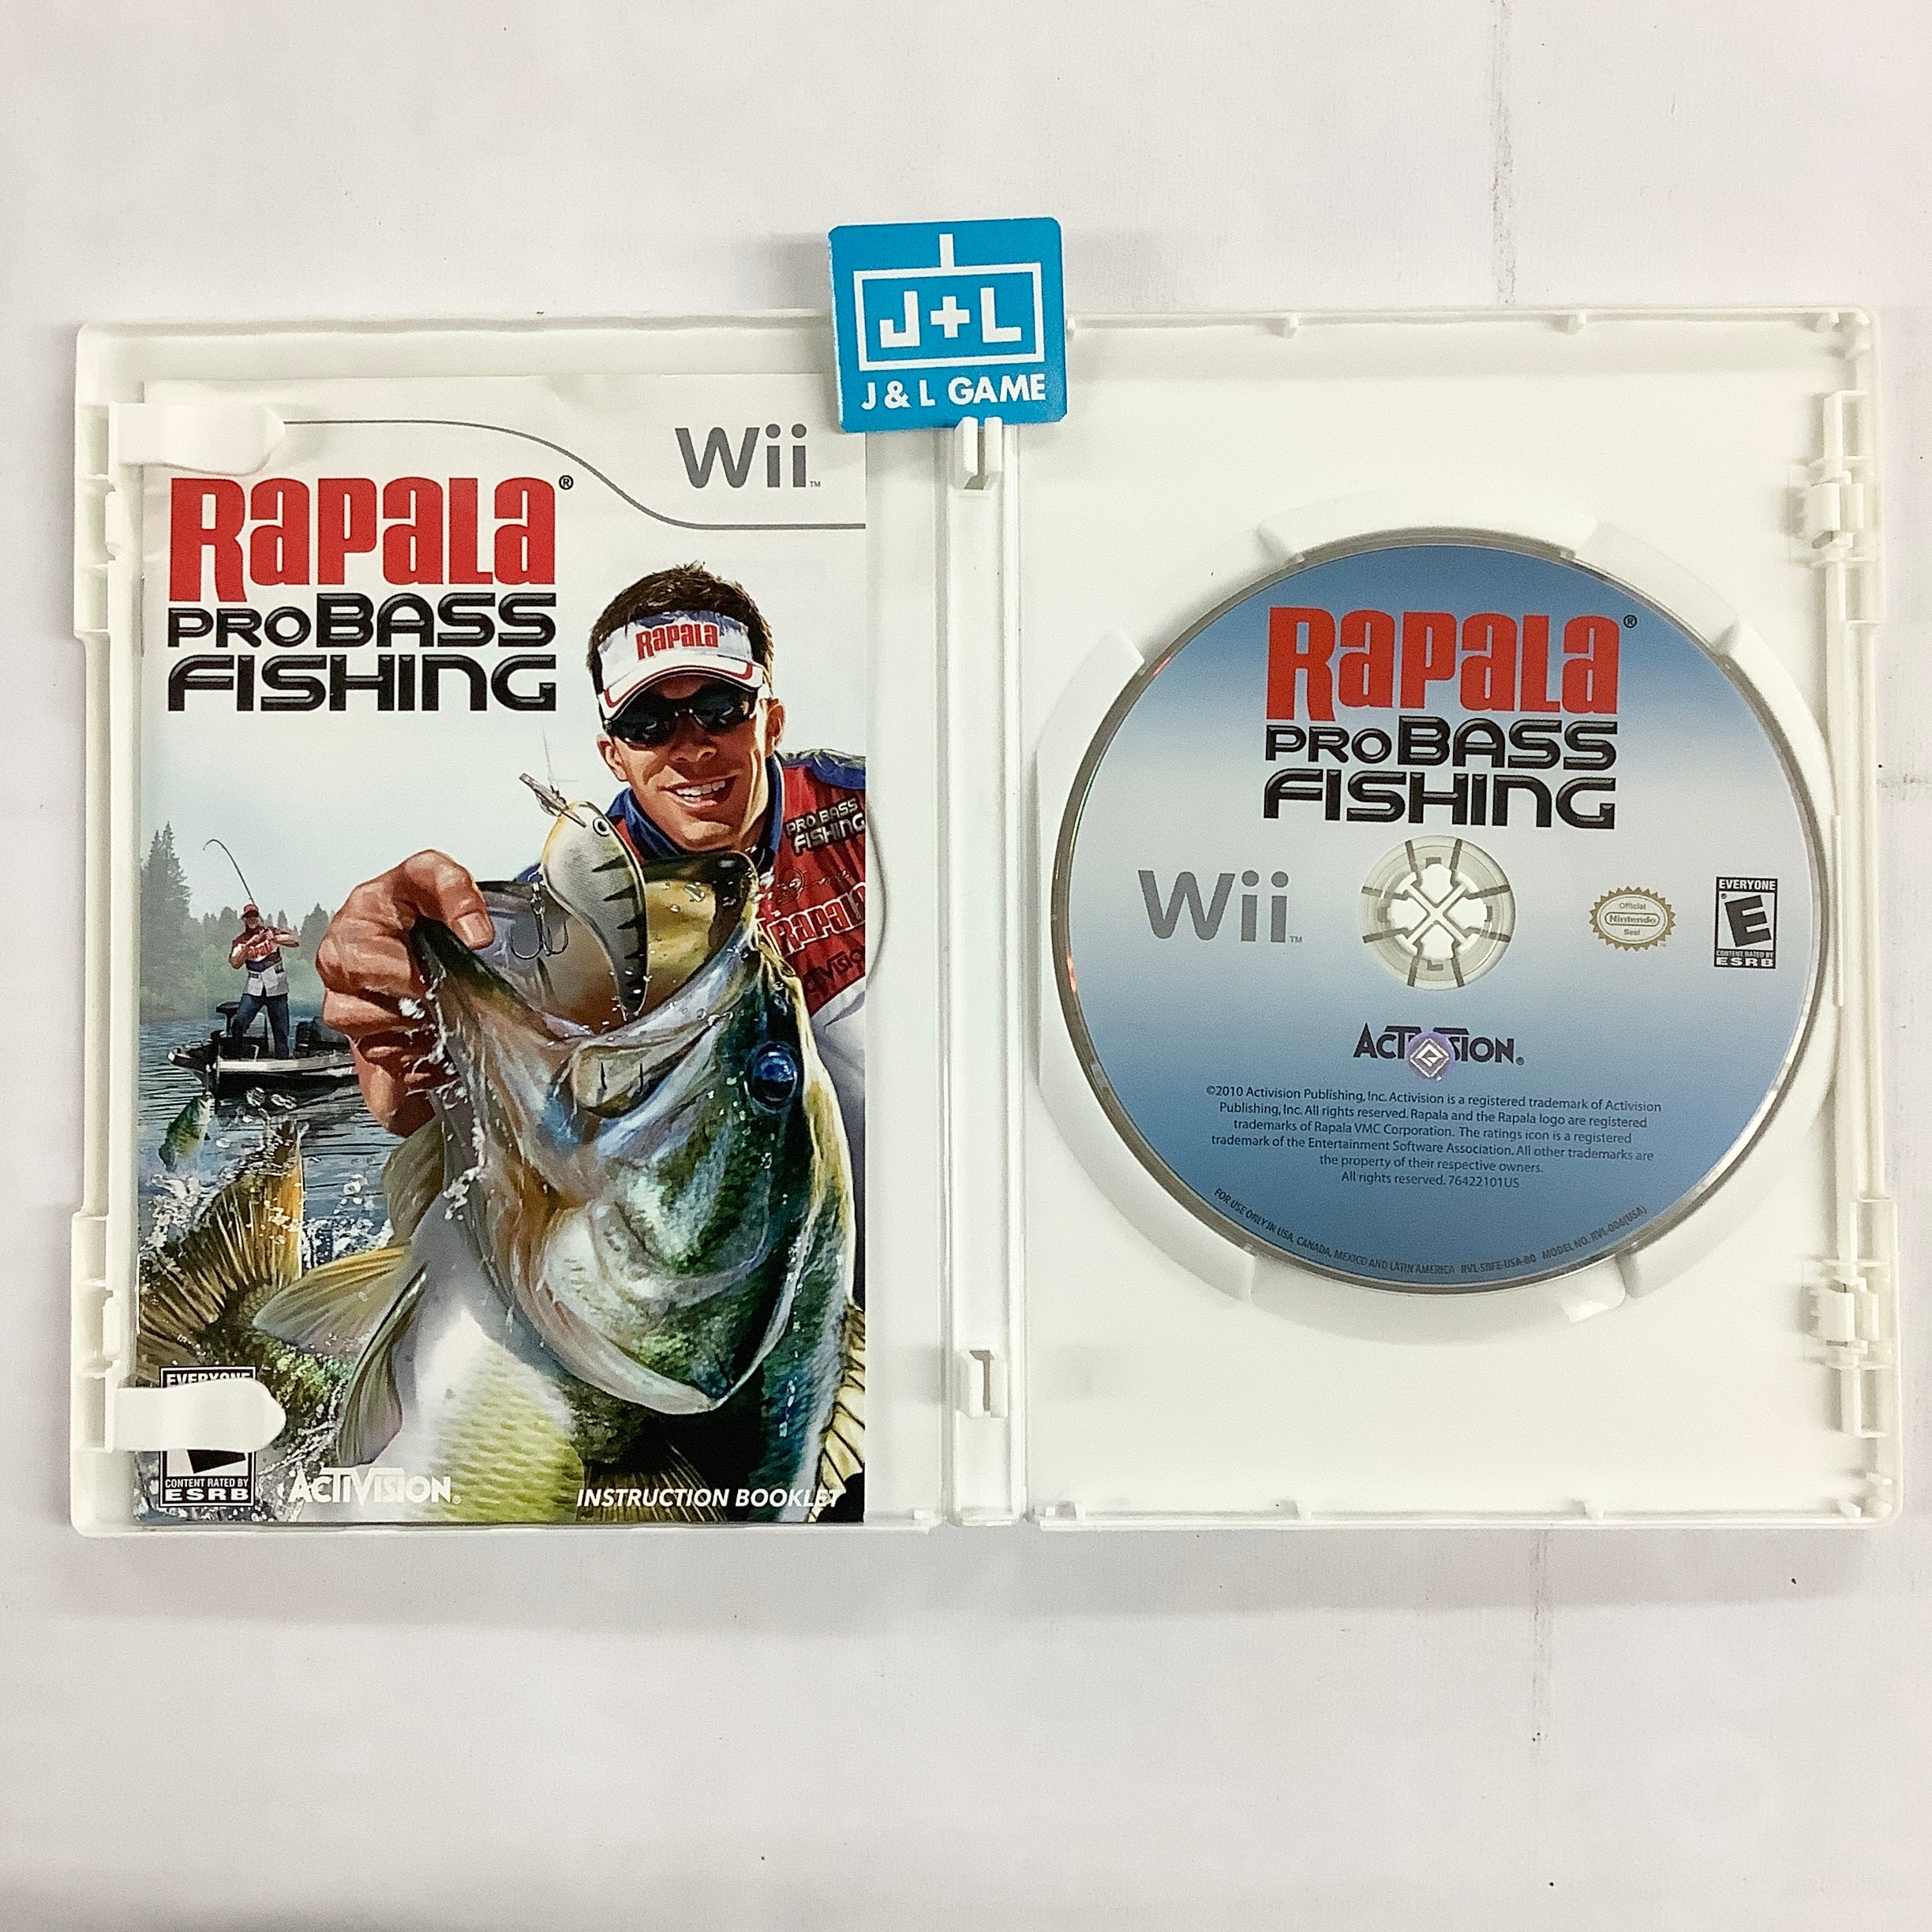 Rapala Pro Bass Fishing (2010) - Nintendo Wii [Pre-Owned] Video Games Activision   